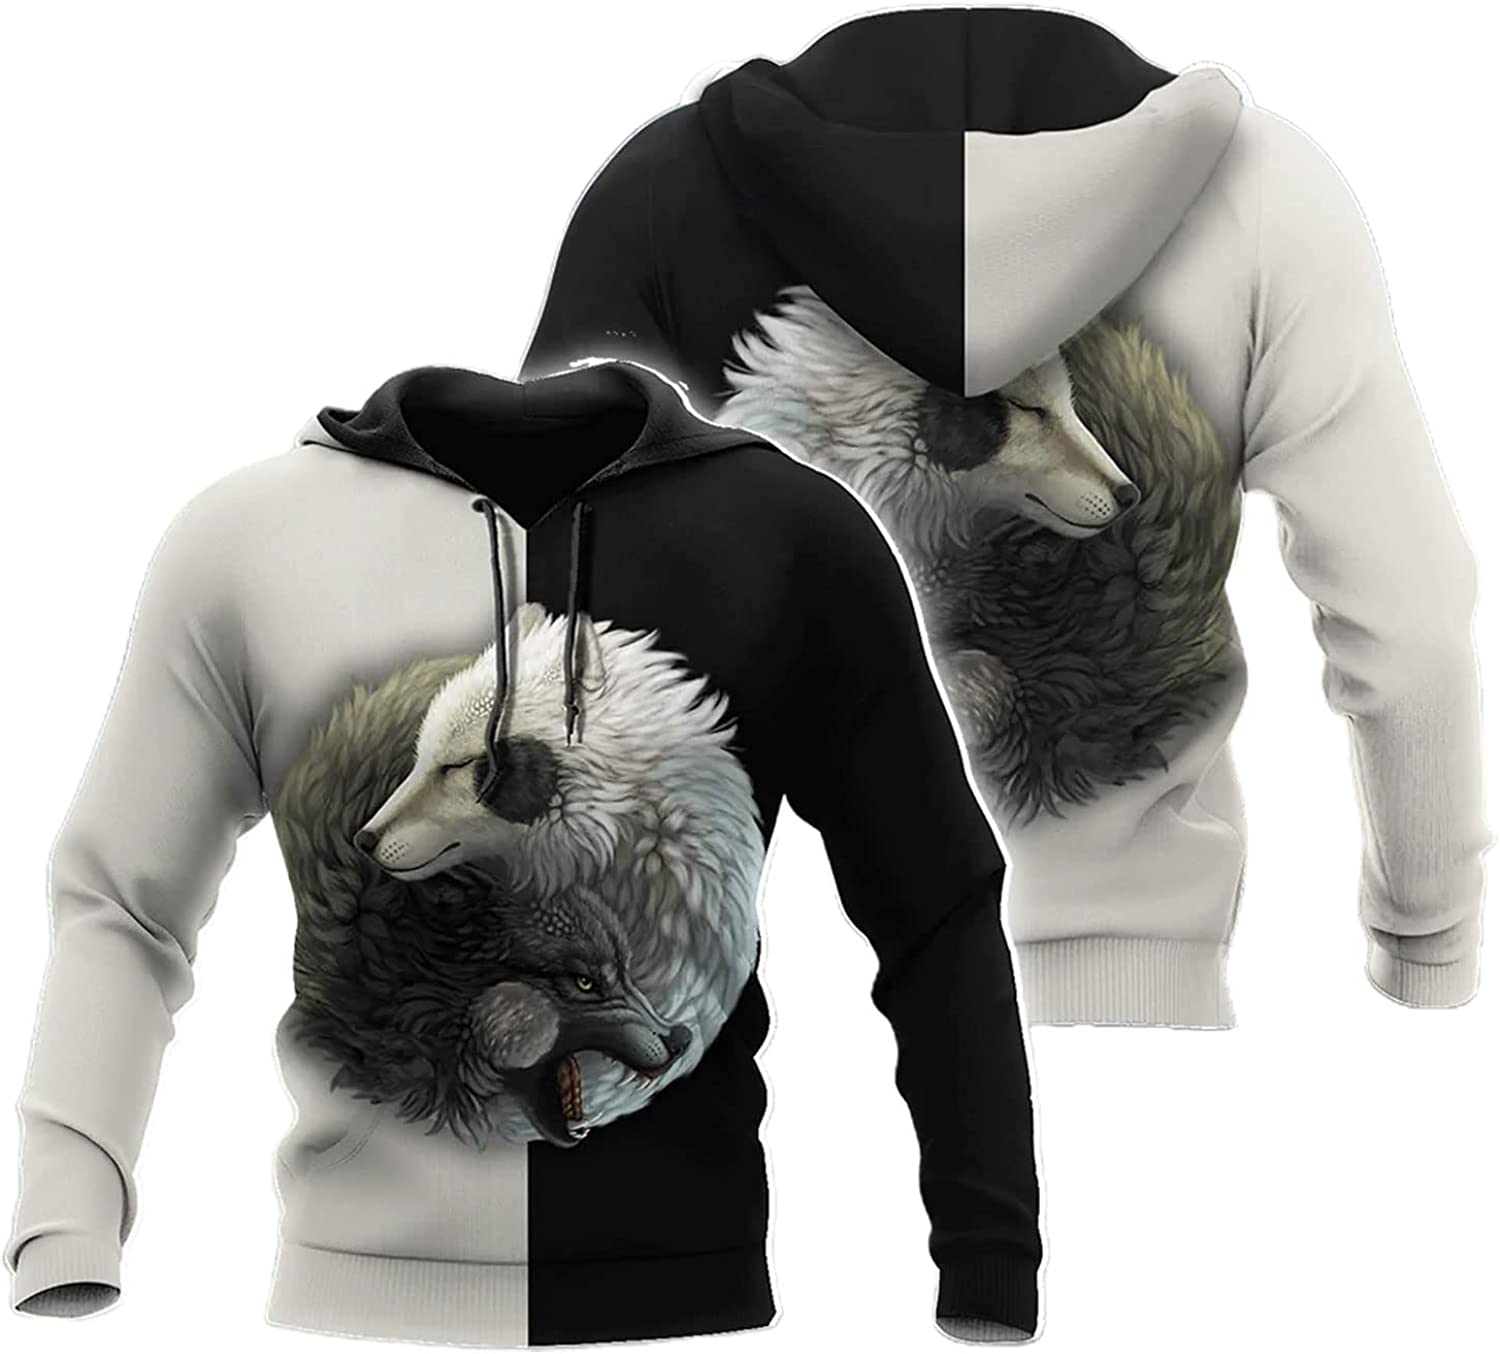 Wolf Yin & Yang 3D Hoodie with All-Over Print, Perfect for Winter and Wolf Lovers, Ideal Gift for Hunting Enthusiasts and Family, Available in Pullover Hoodie, Hawaiian Shirt, and Sweatshirt Variants. – JOT1499